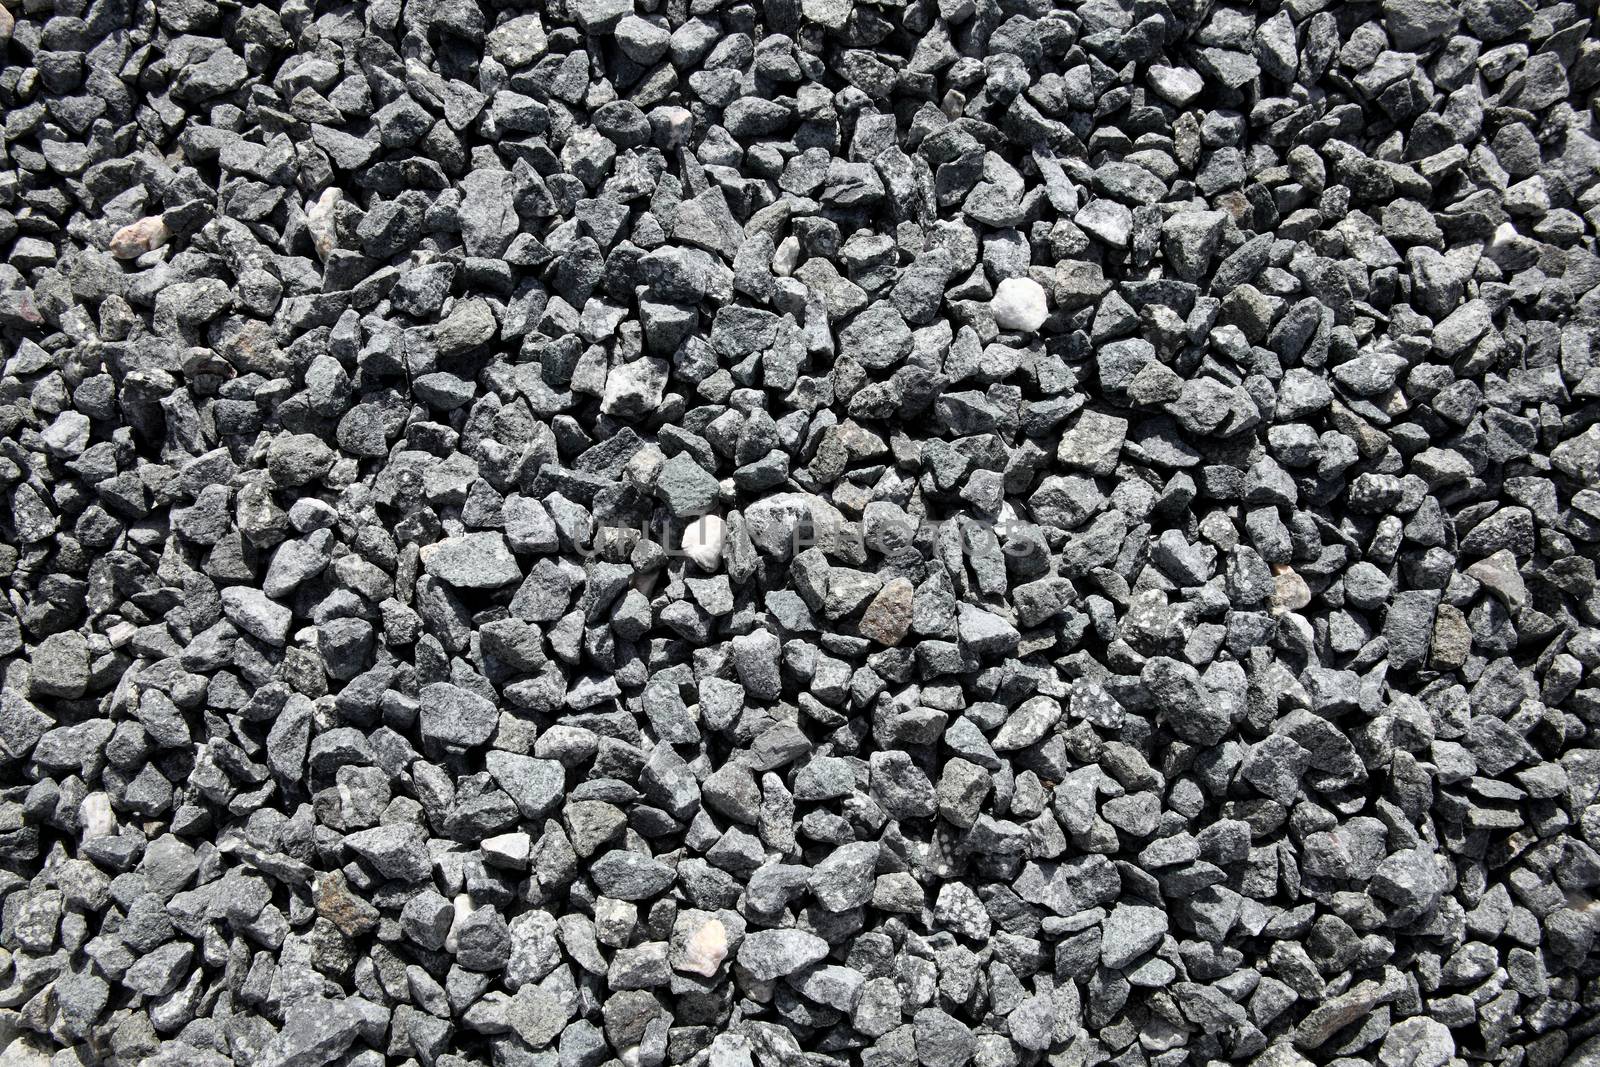 Background texture of grey black, crushed quarry rock pebble stones used for landscaping stock photo